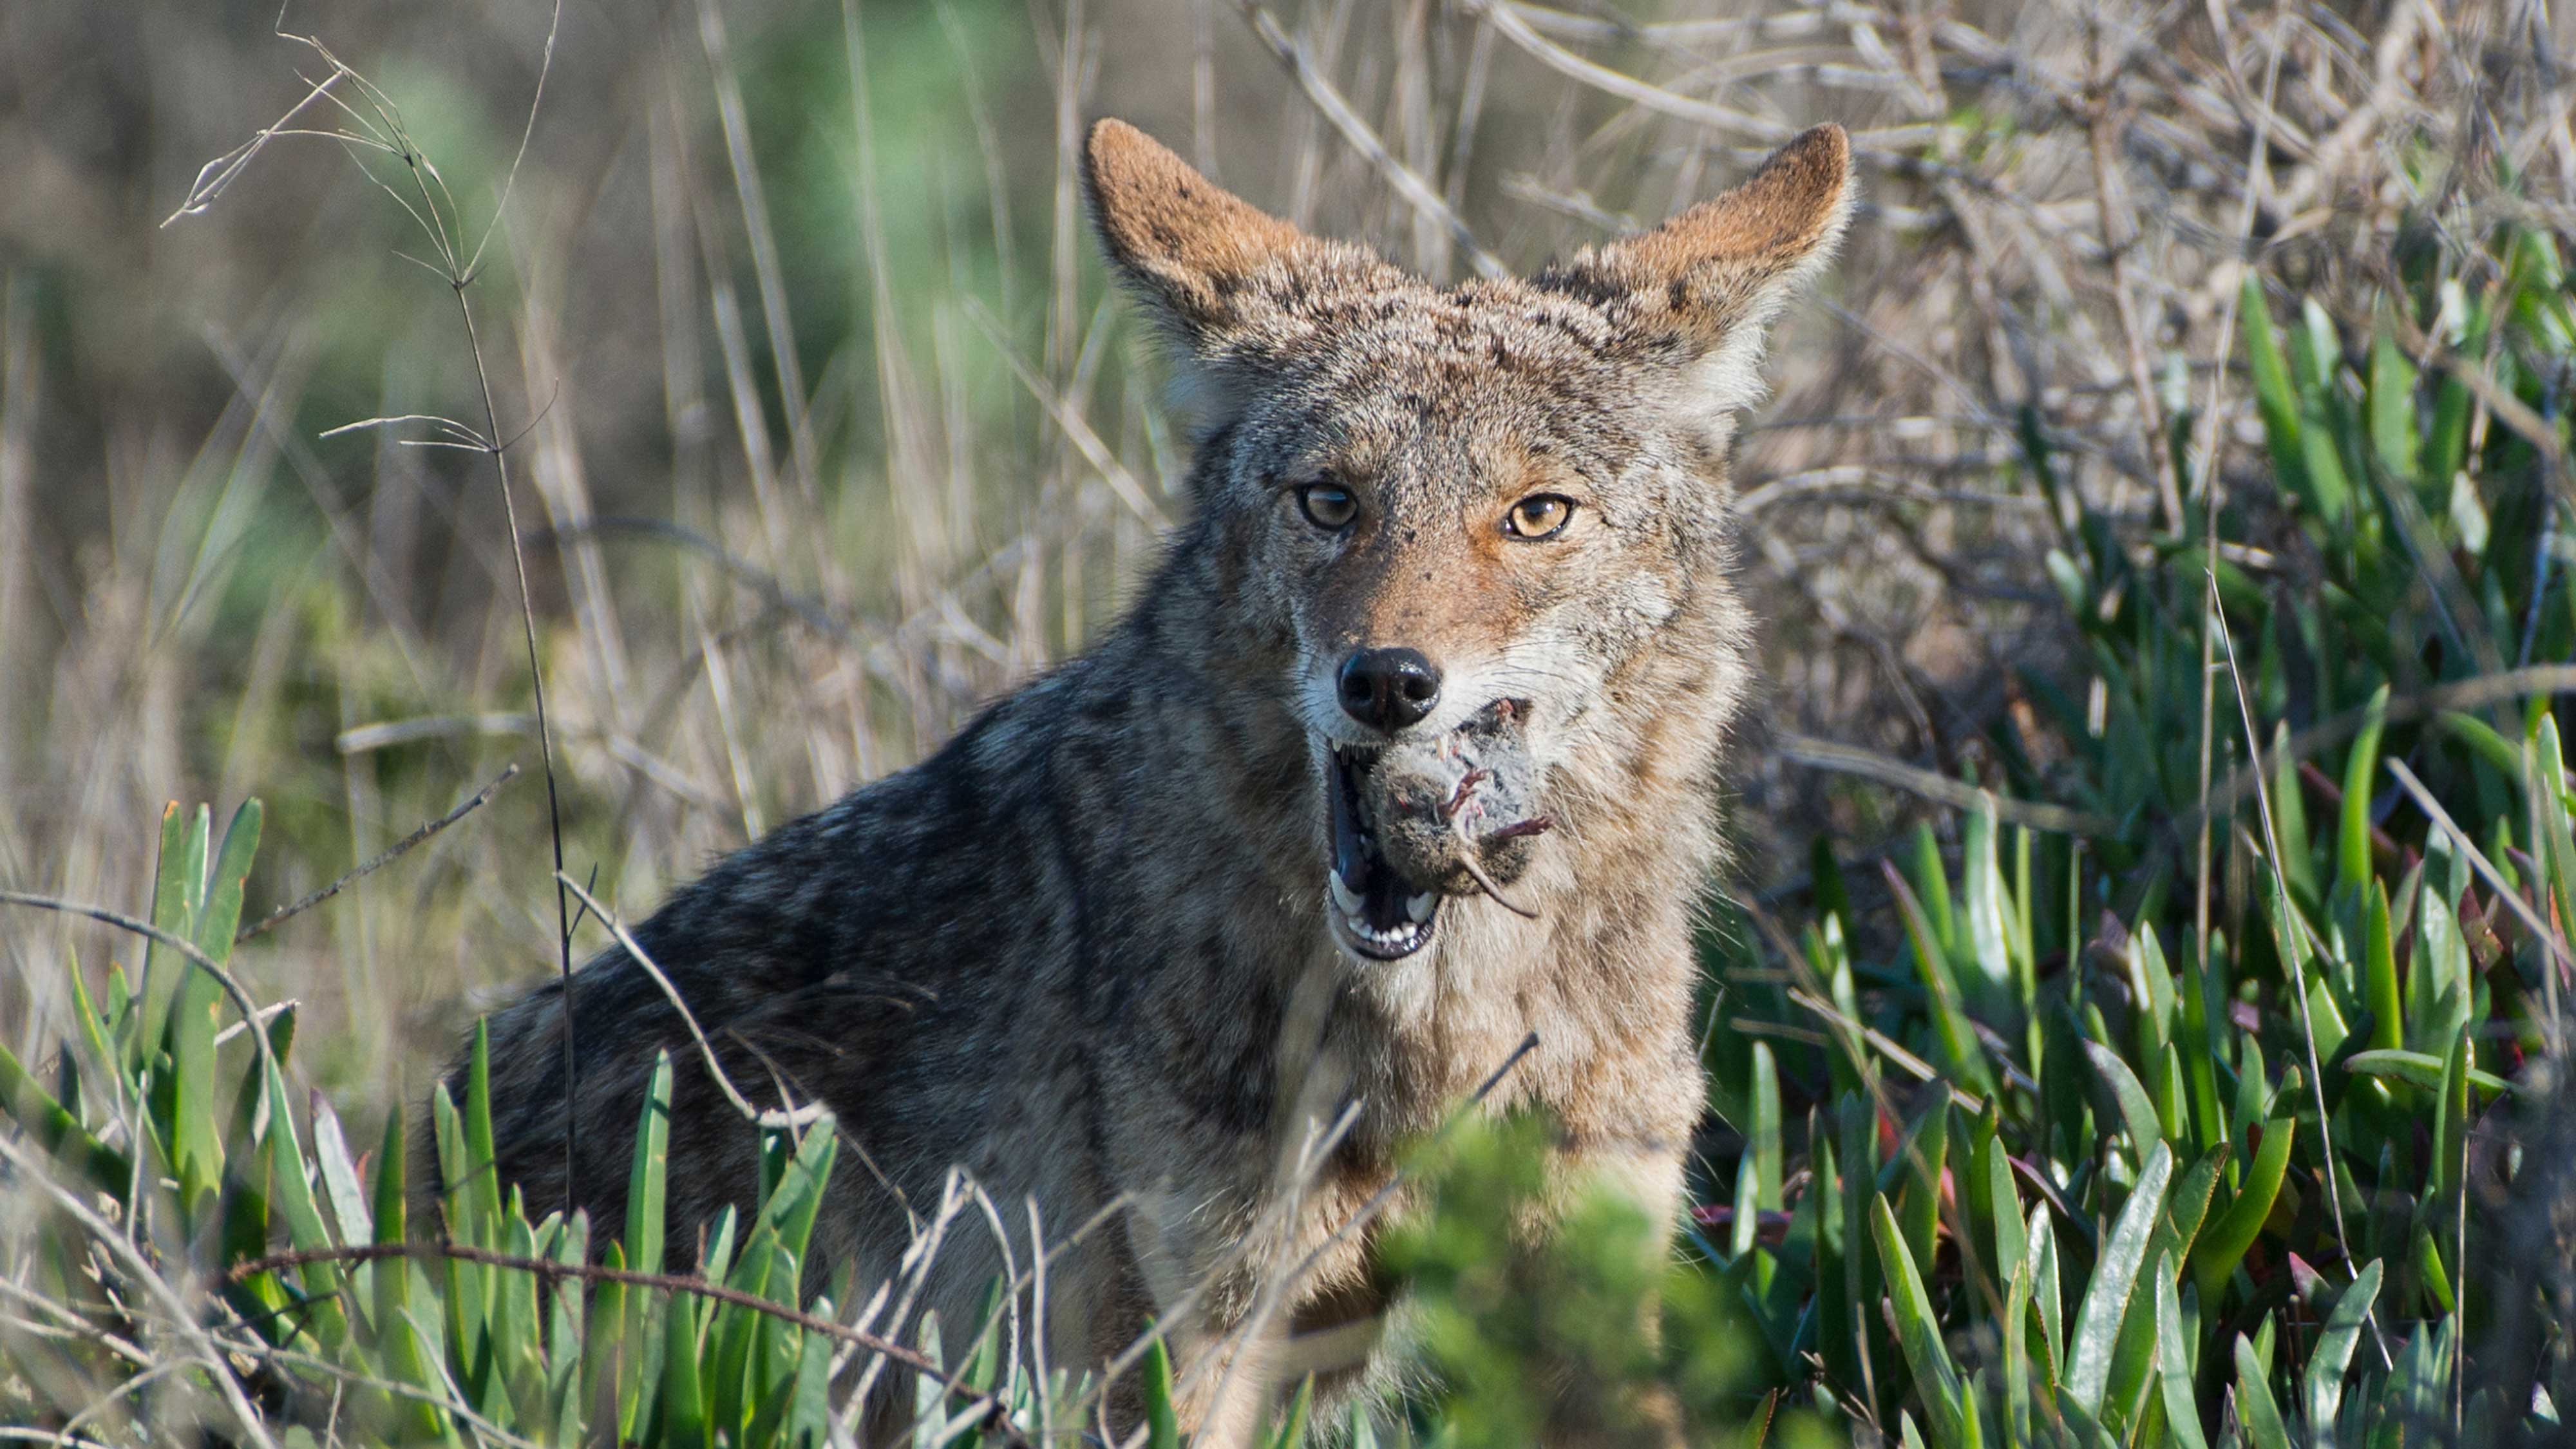 A coyote with a rodent in its mouth.